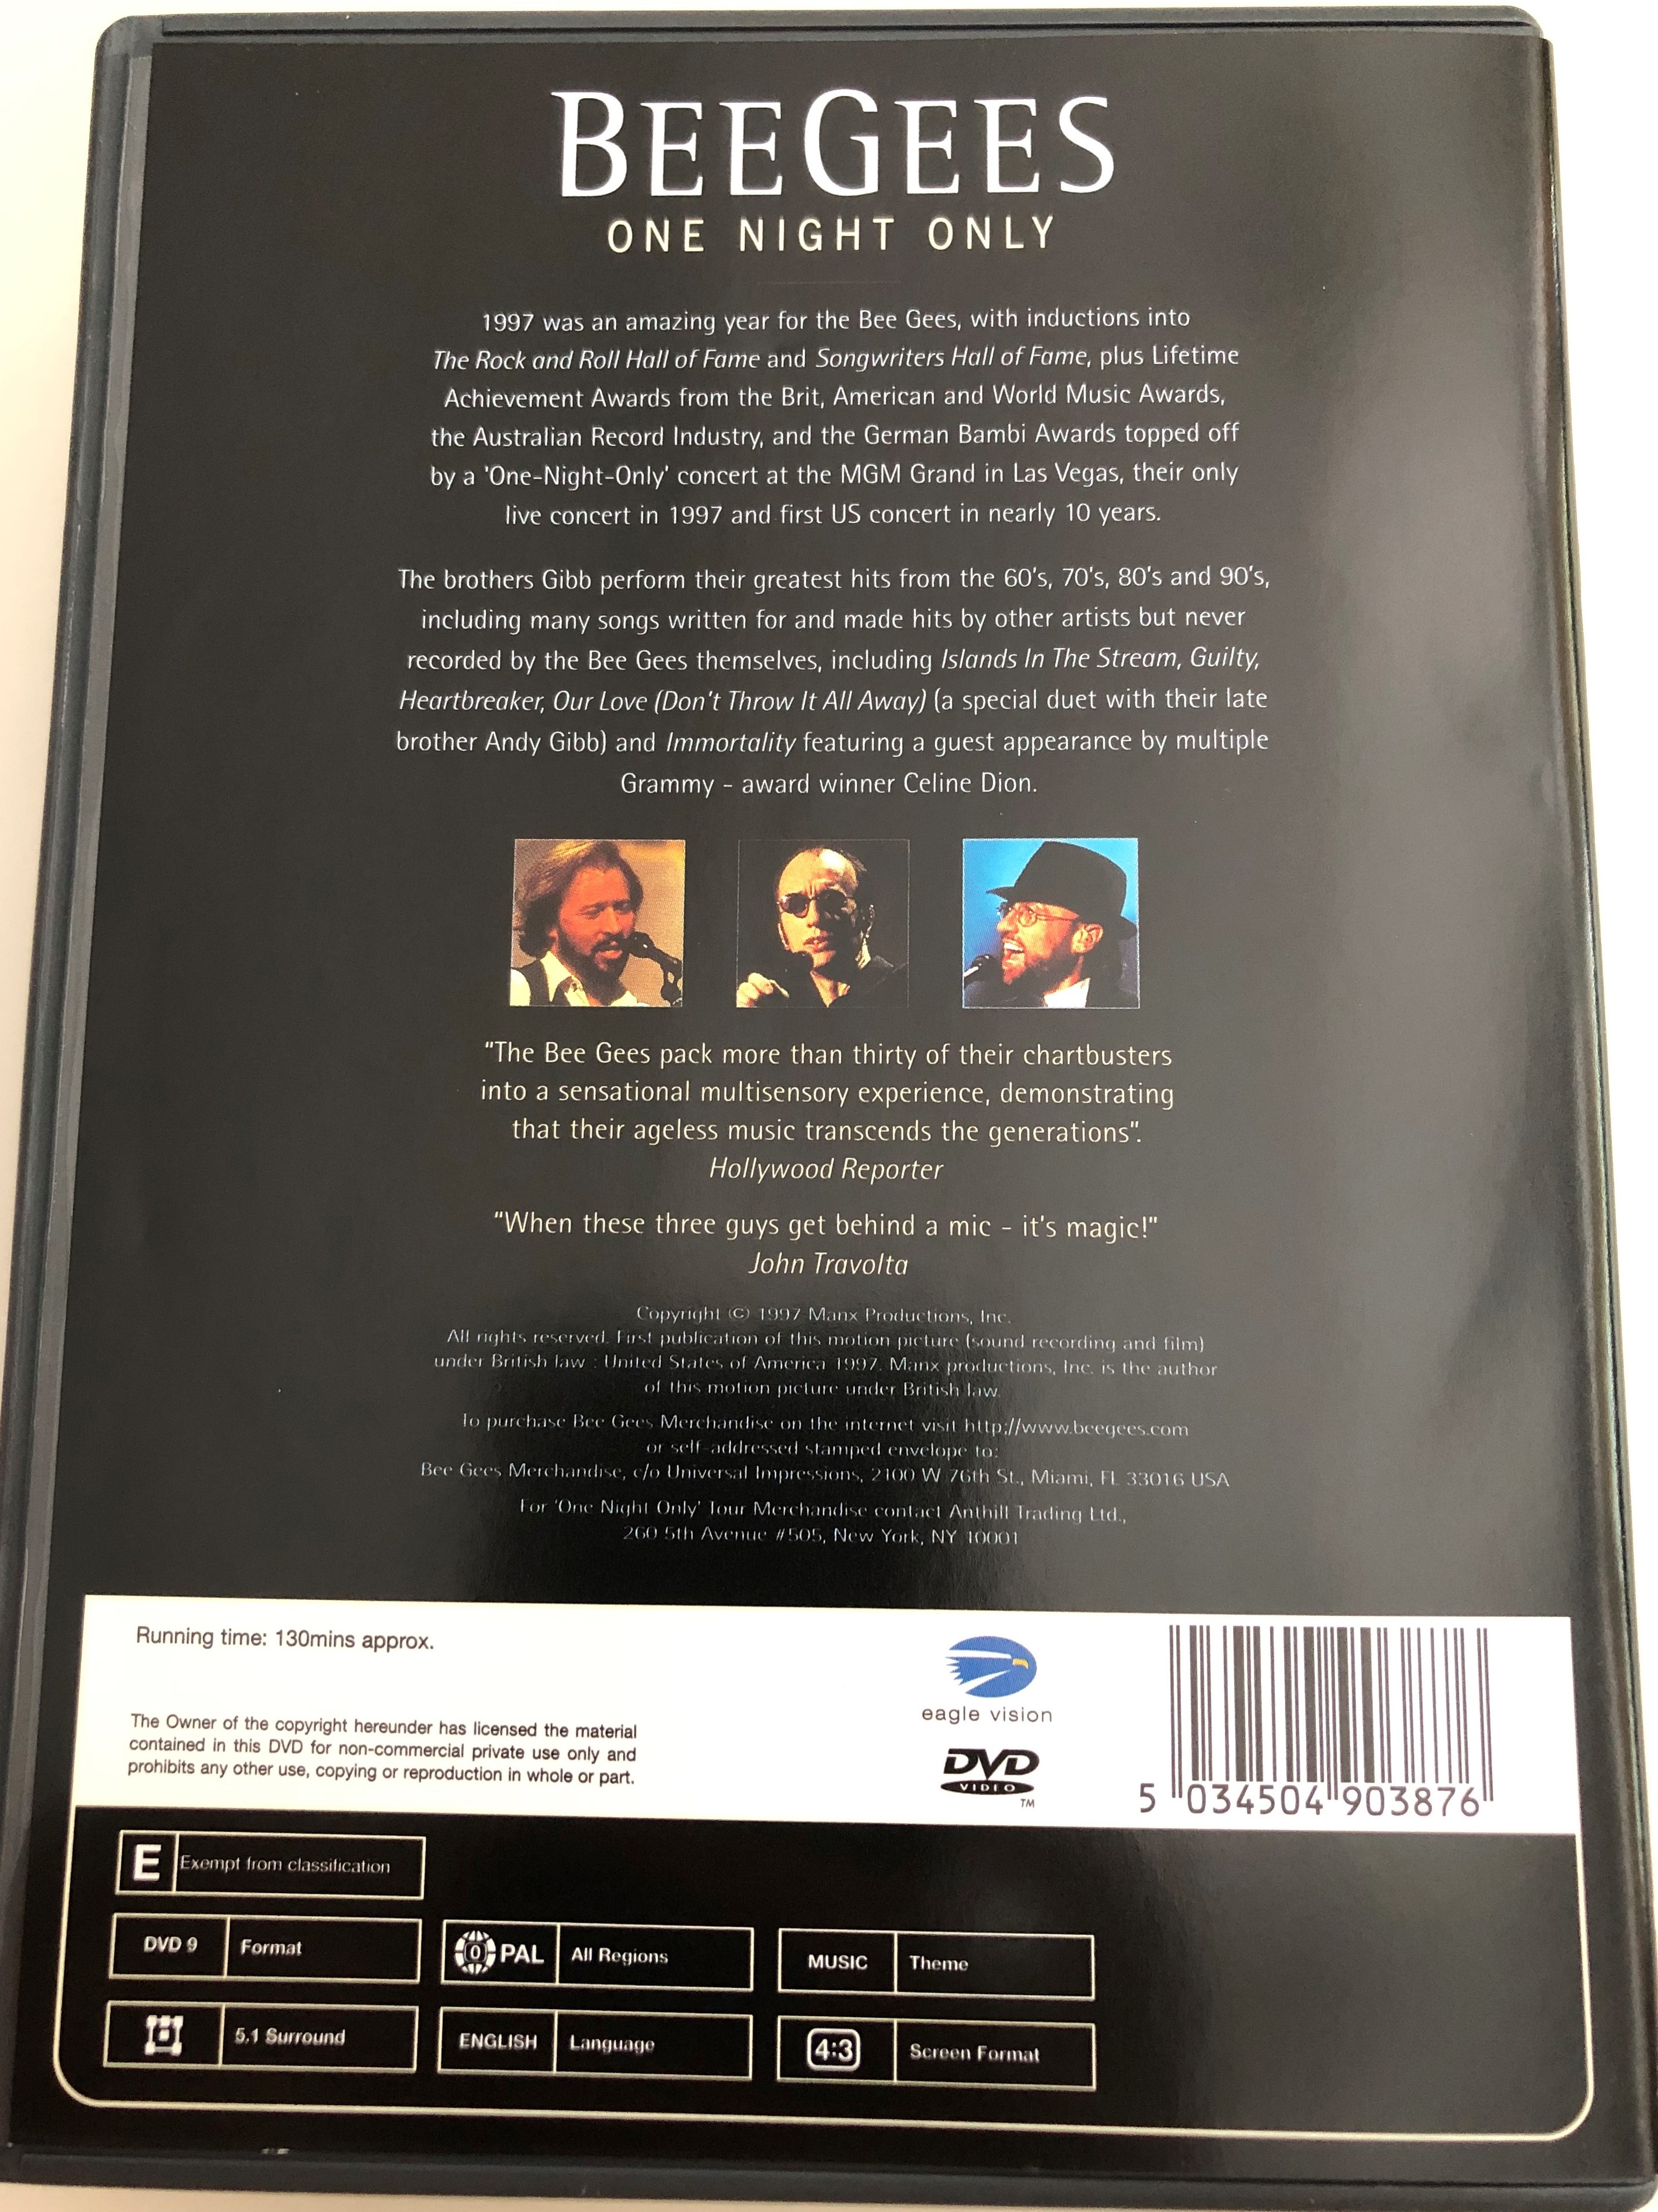 bee-gees-one-night-only-dvd-contains-previously-unreleased-performances-of-islands-in-the-sream-guilty-heartbreaker-ft.-andy-gibb-immortality-ft.-celine-dion-4-.jpg